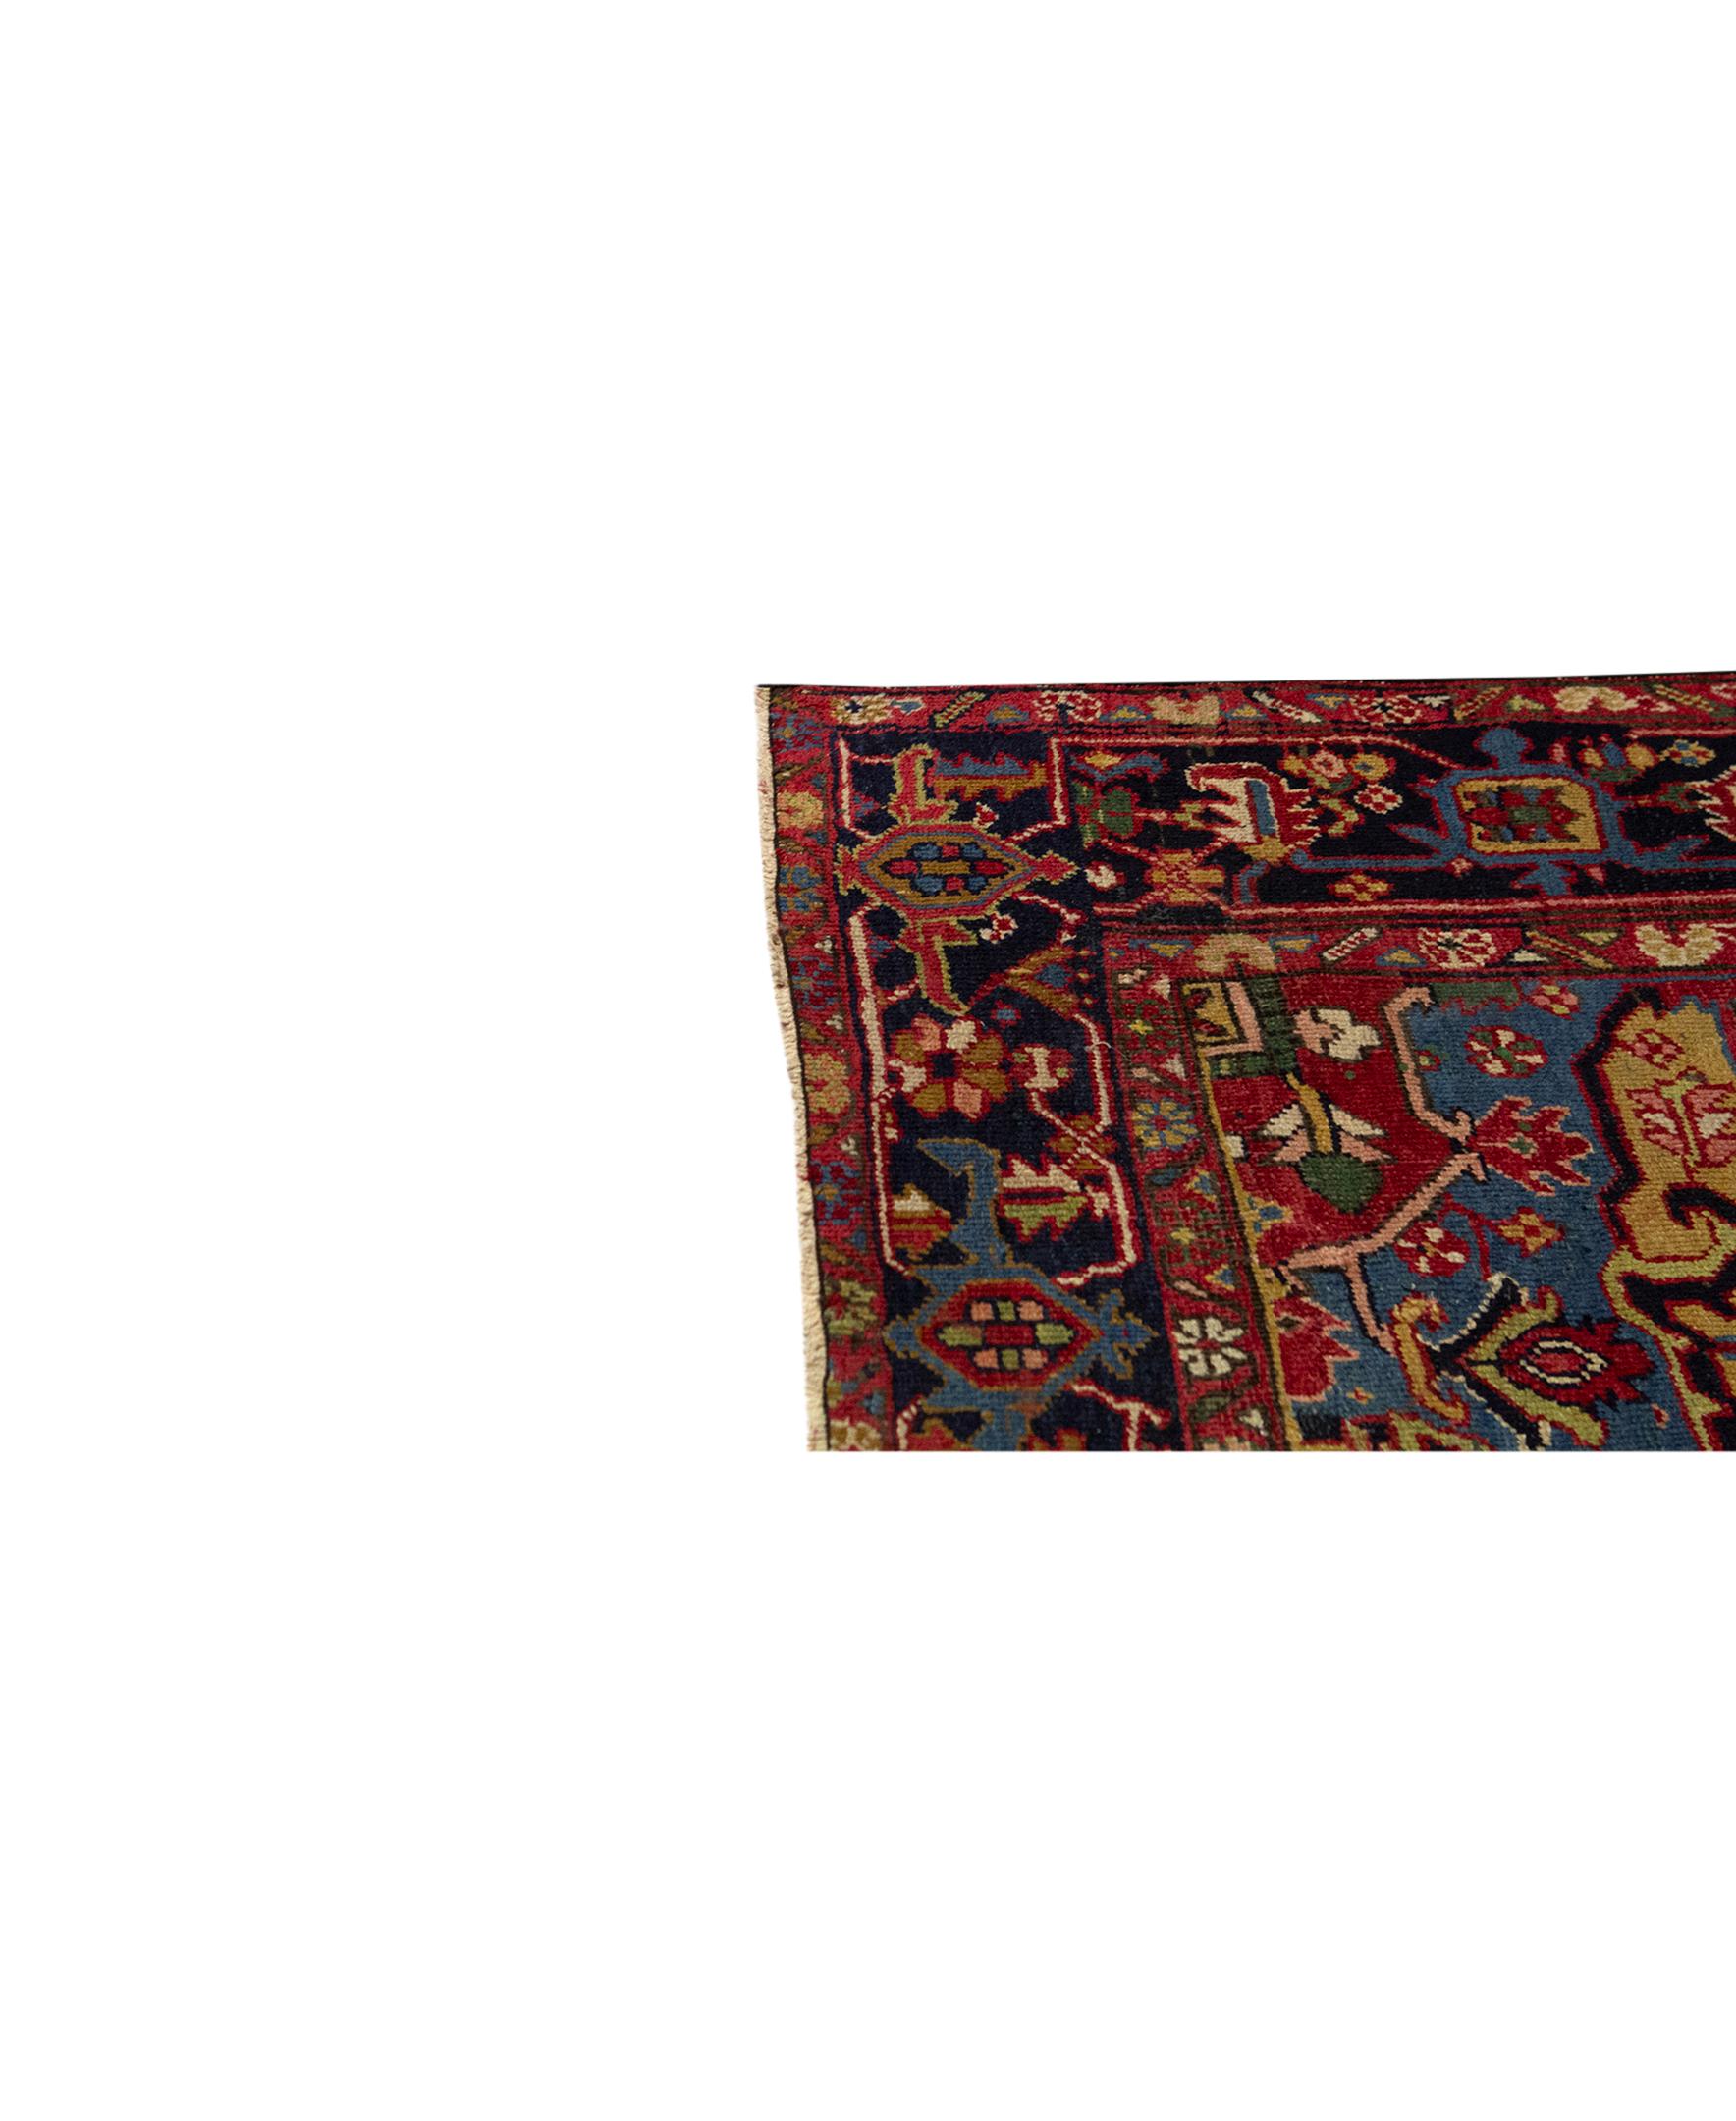   Antique Persian Fine Traditional Handwoven Luxury Wool Red / Navy Rug. Size: 7'-7